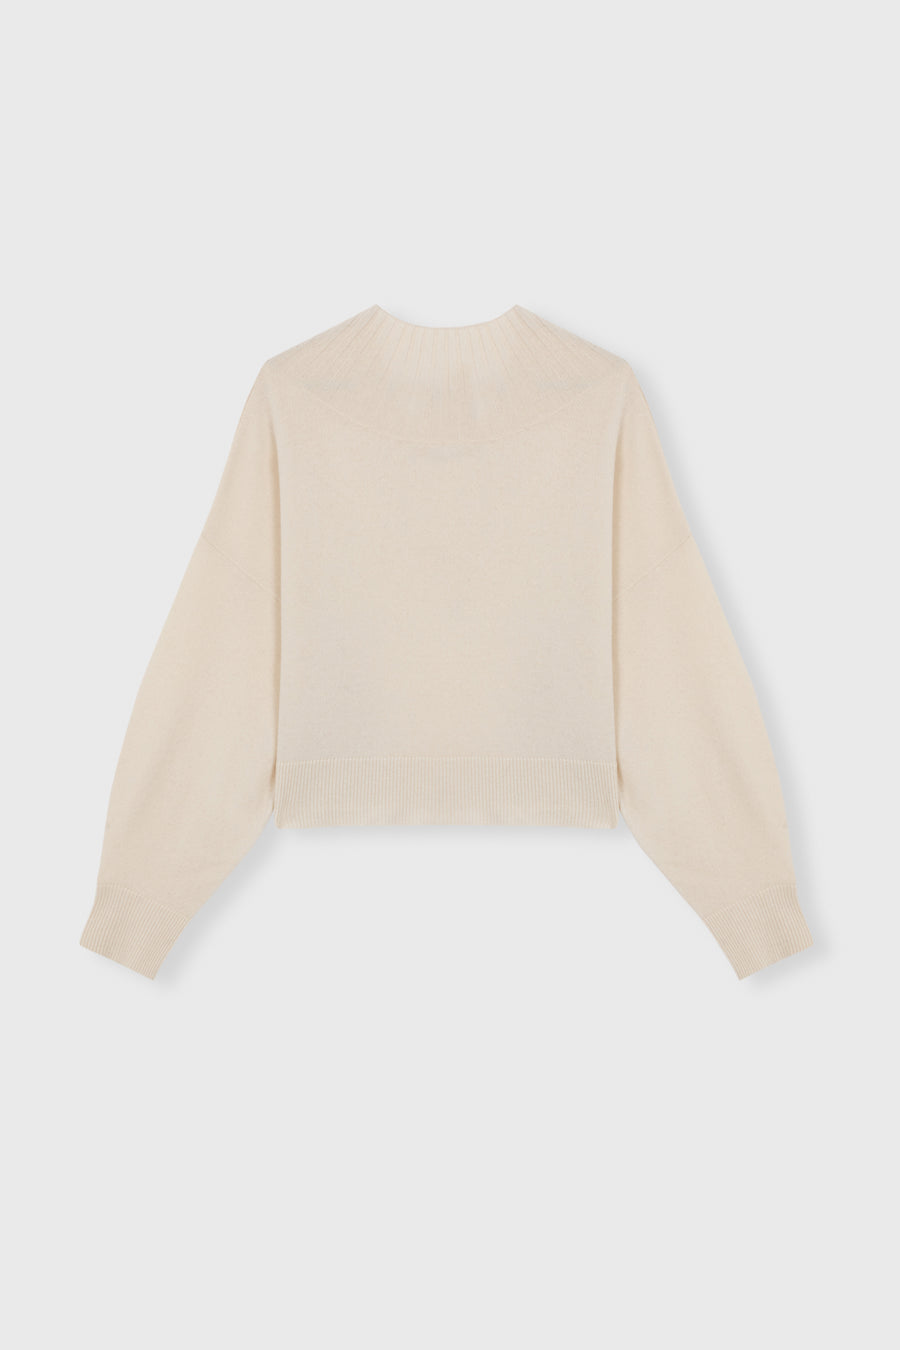 CASHMERE RIBBED NECK SWEATER - NATURAL